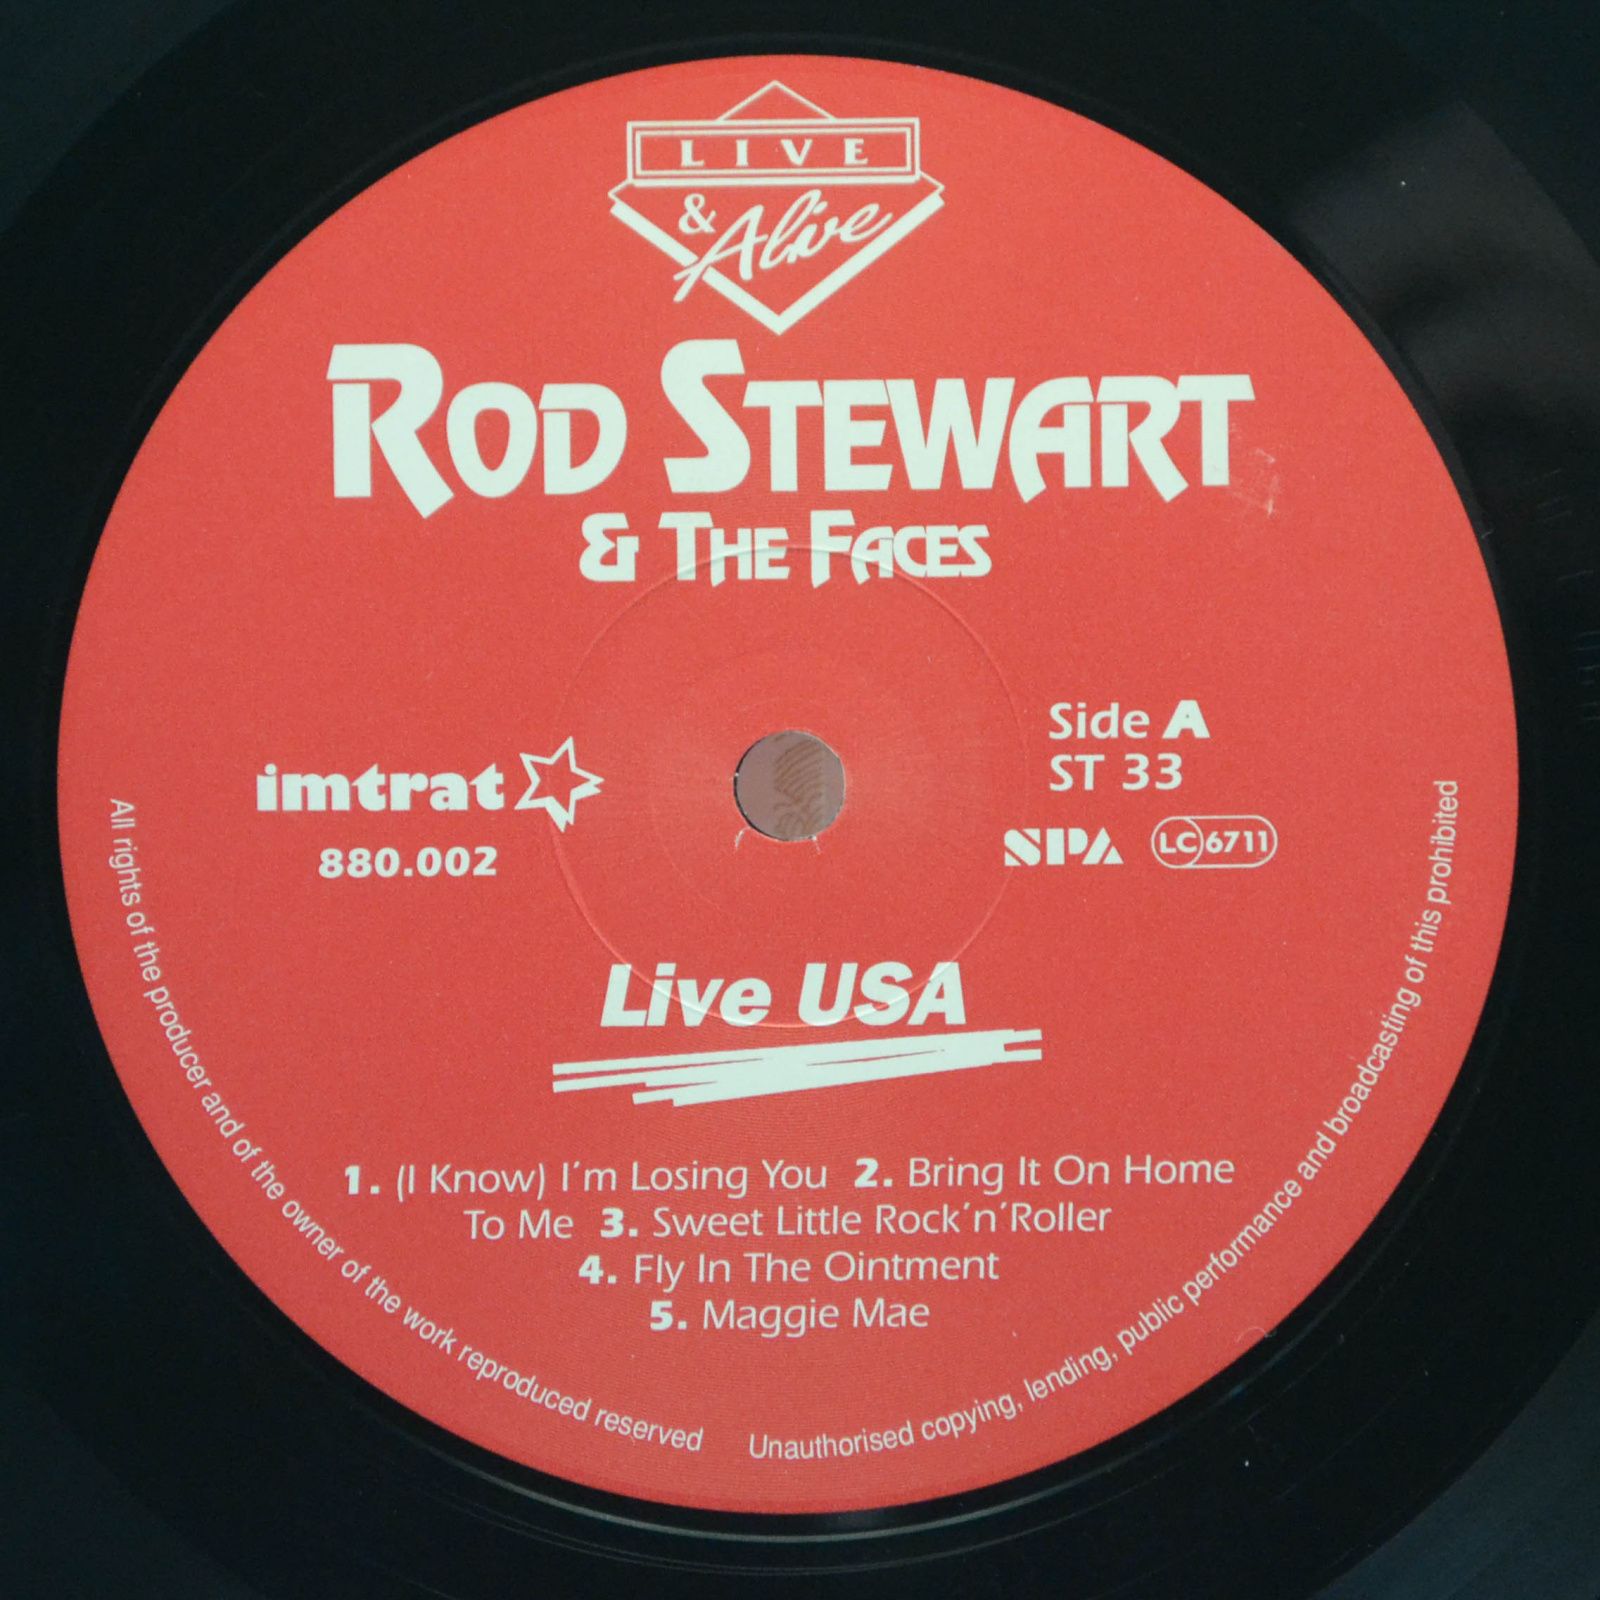 Rod Stewart & The Faces — Live USA, 1992